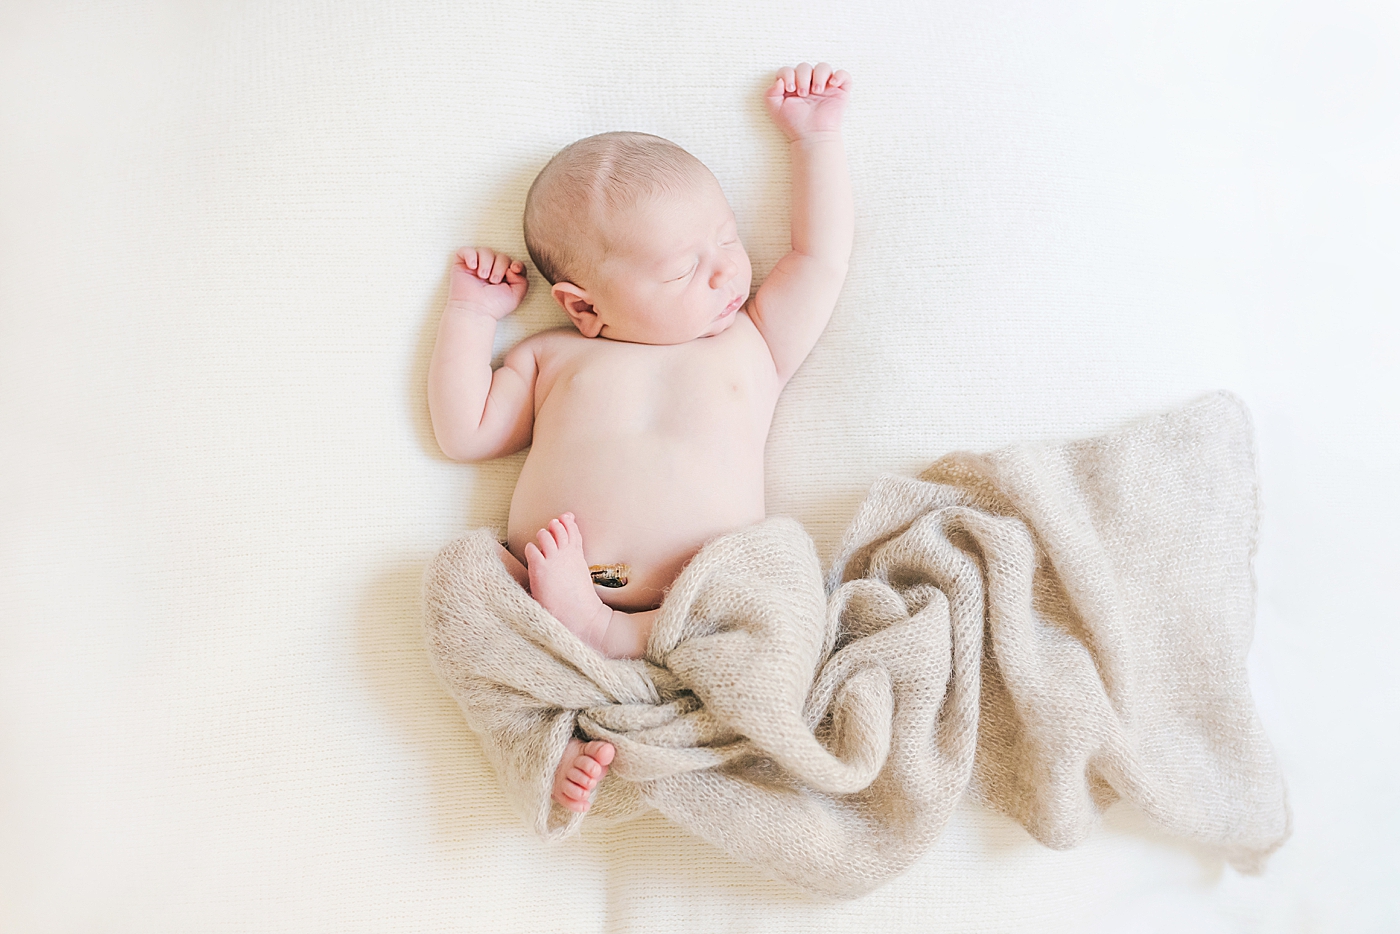 Newborn baby boy stretching in a tan swaddle | Photo by Anna Wisjo Photography